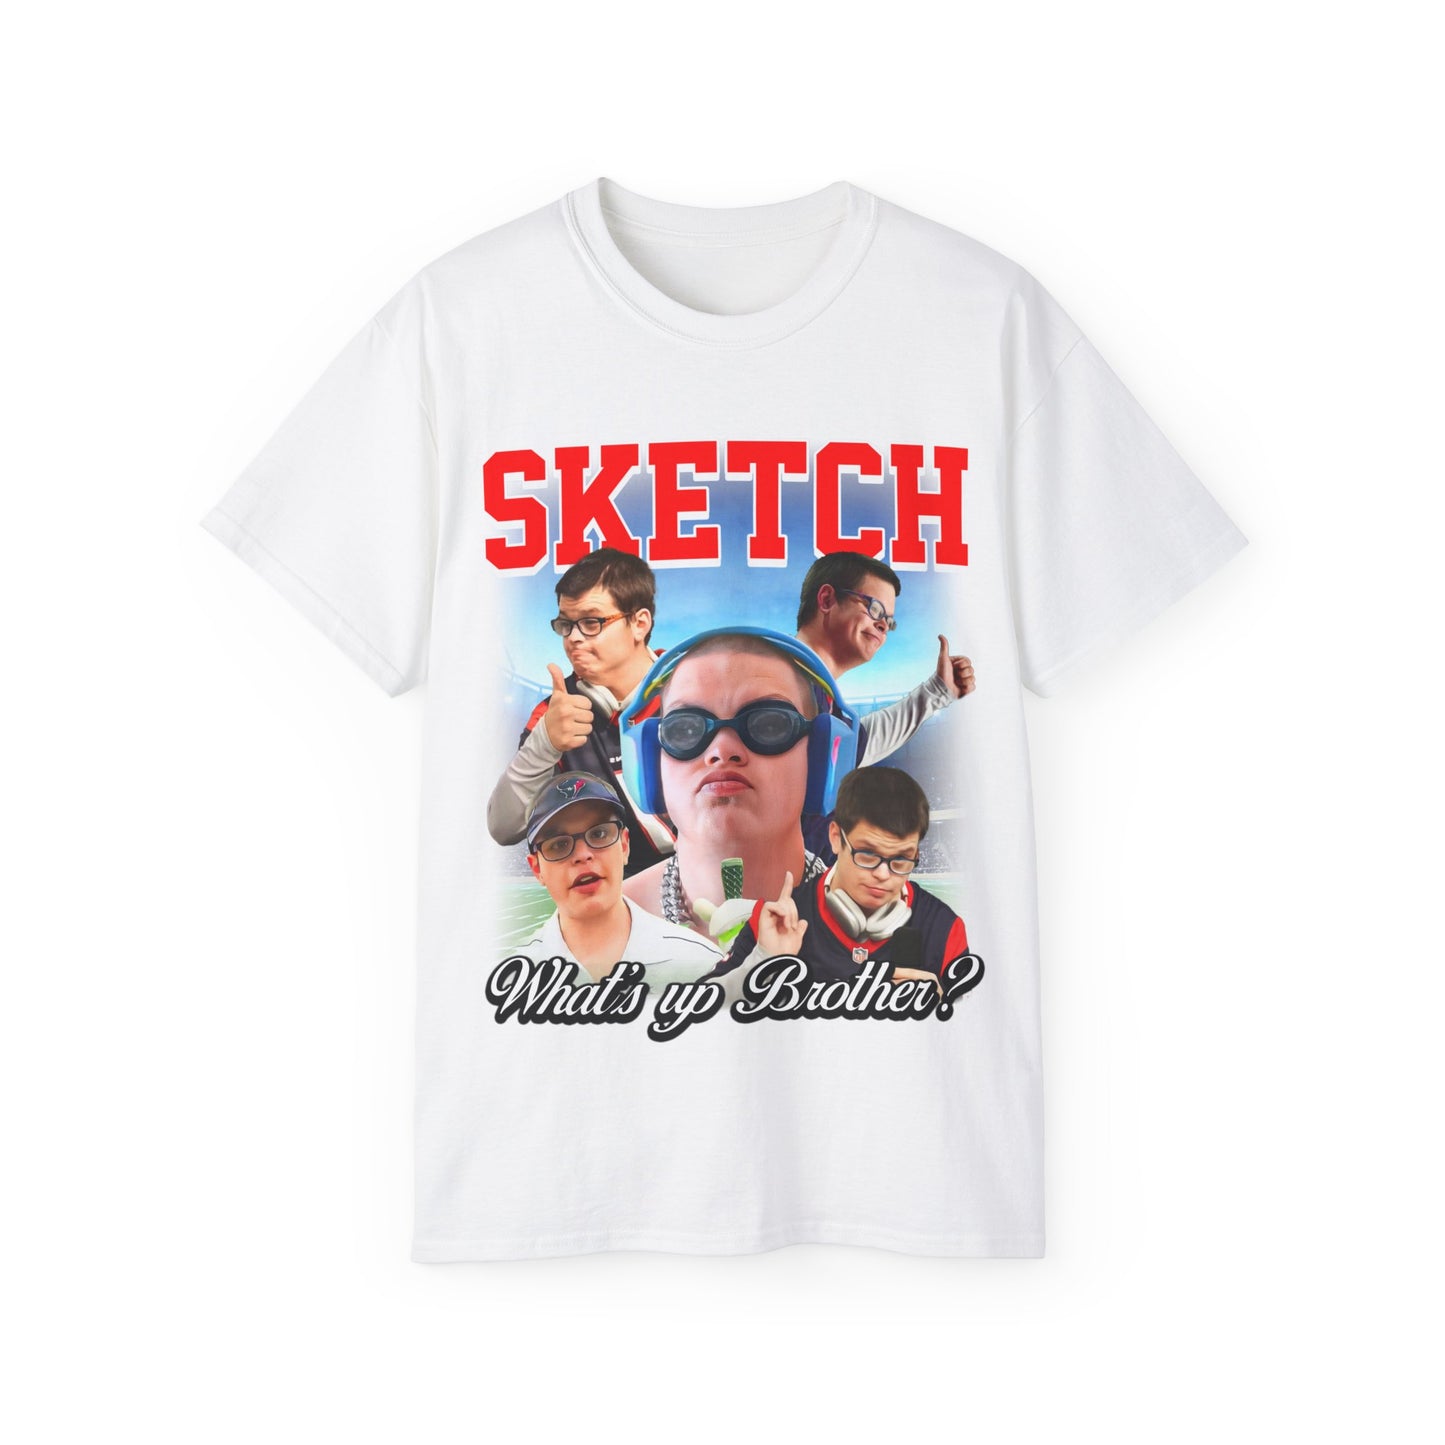 Sketch "What's Up Brother?" | T-Shirt